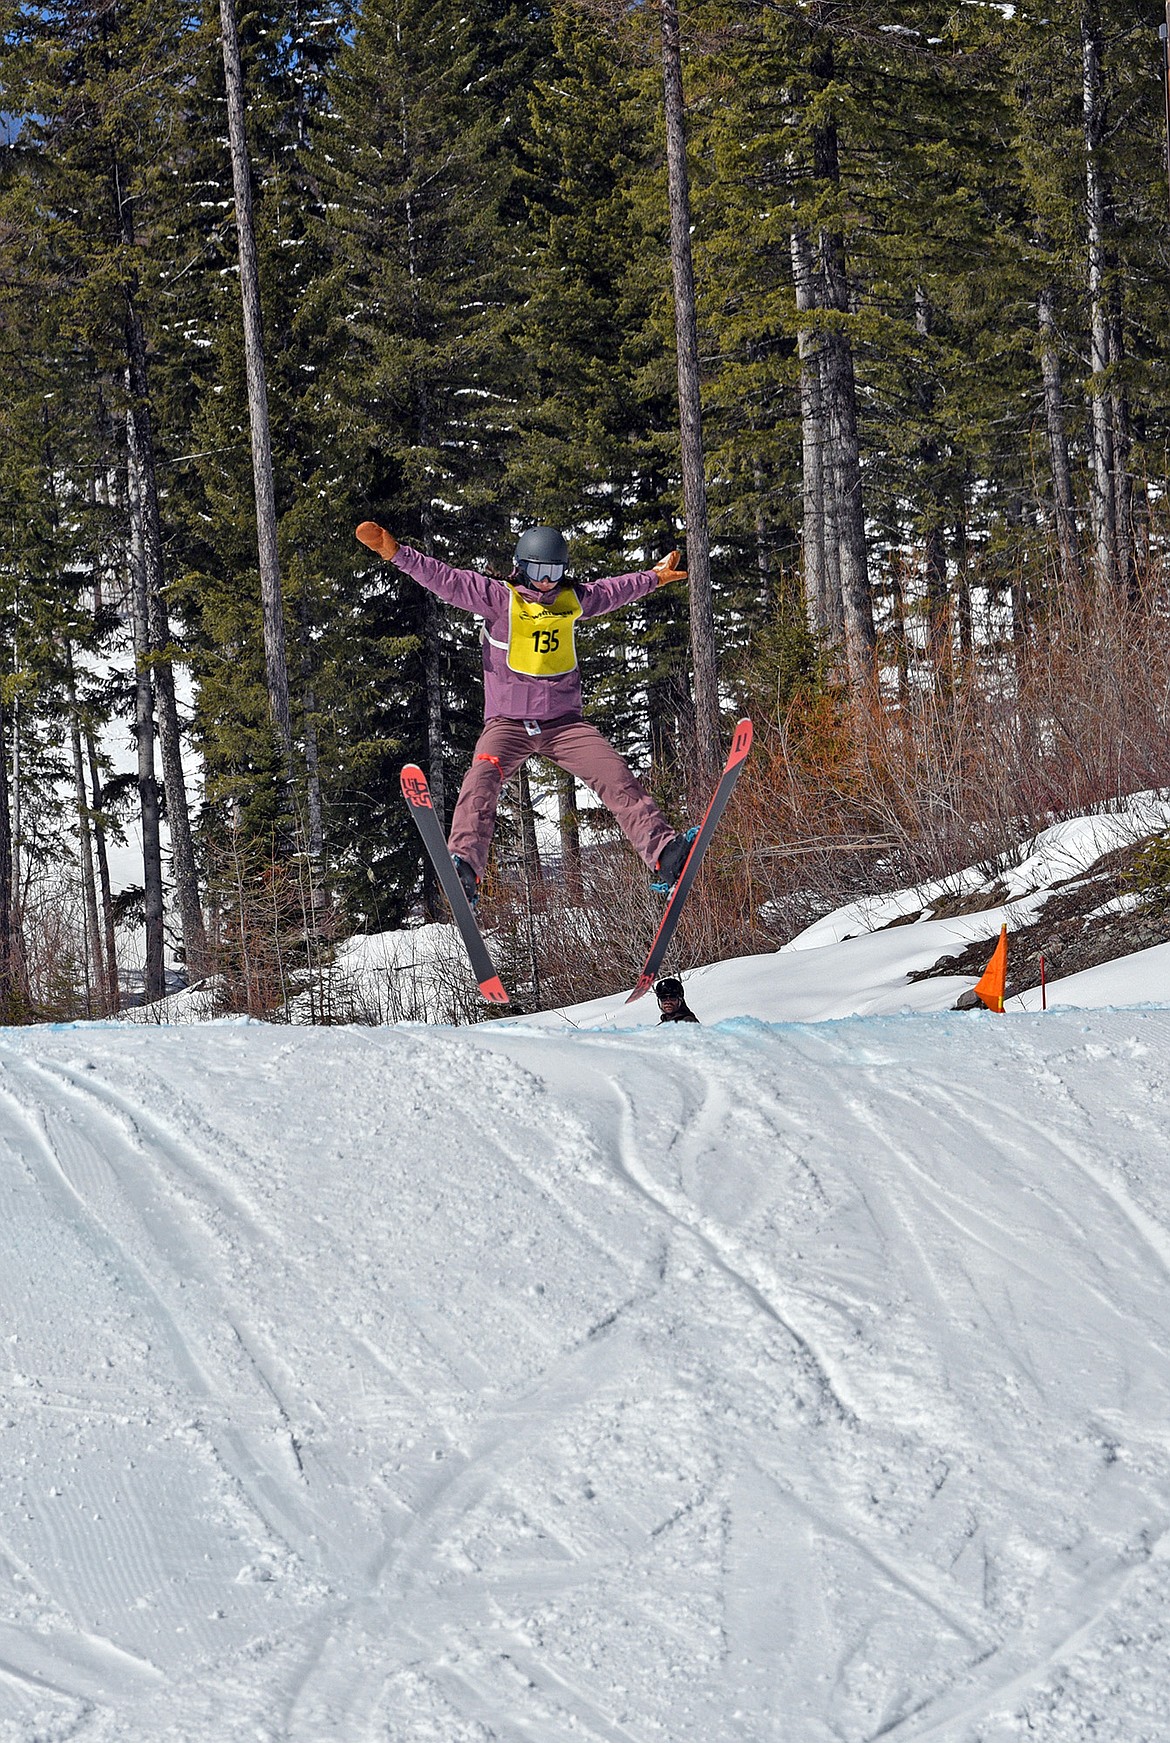 Bright smiles, big tricks and wild costumes made the 3rd annual Lady Power Park Hour a huge success at the Whitefish Mountain Resort last weekend. (Julie Engler/Whitefish Pilot)